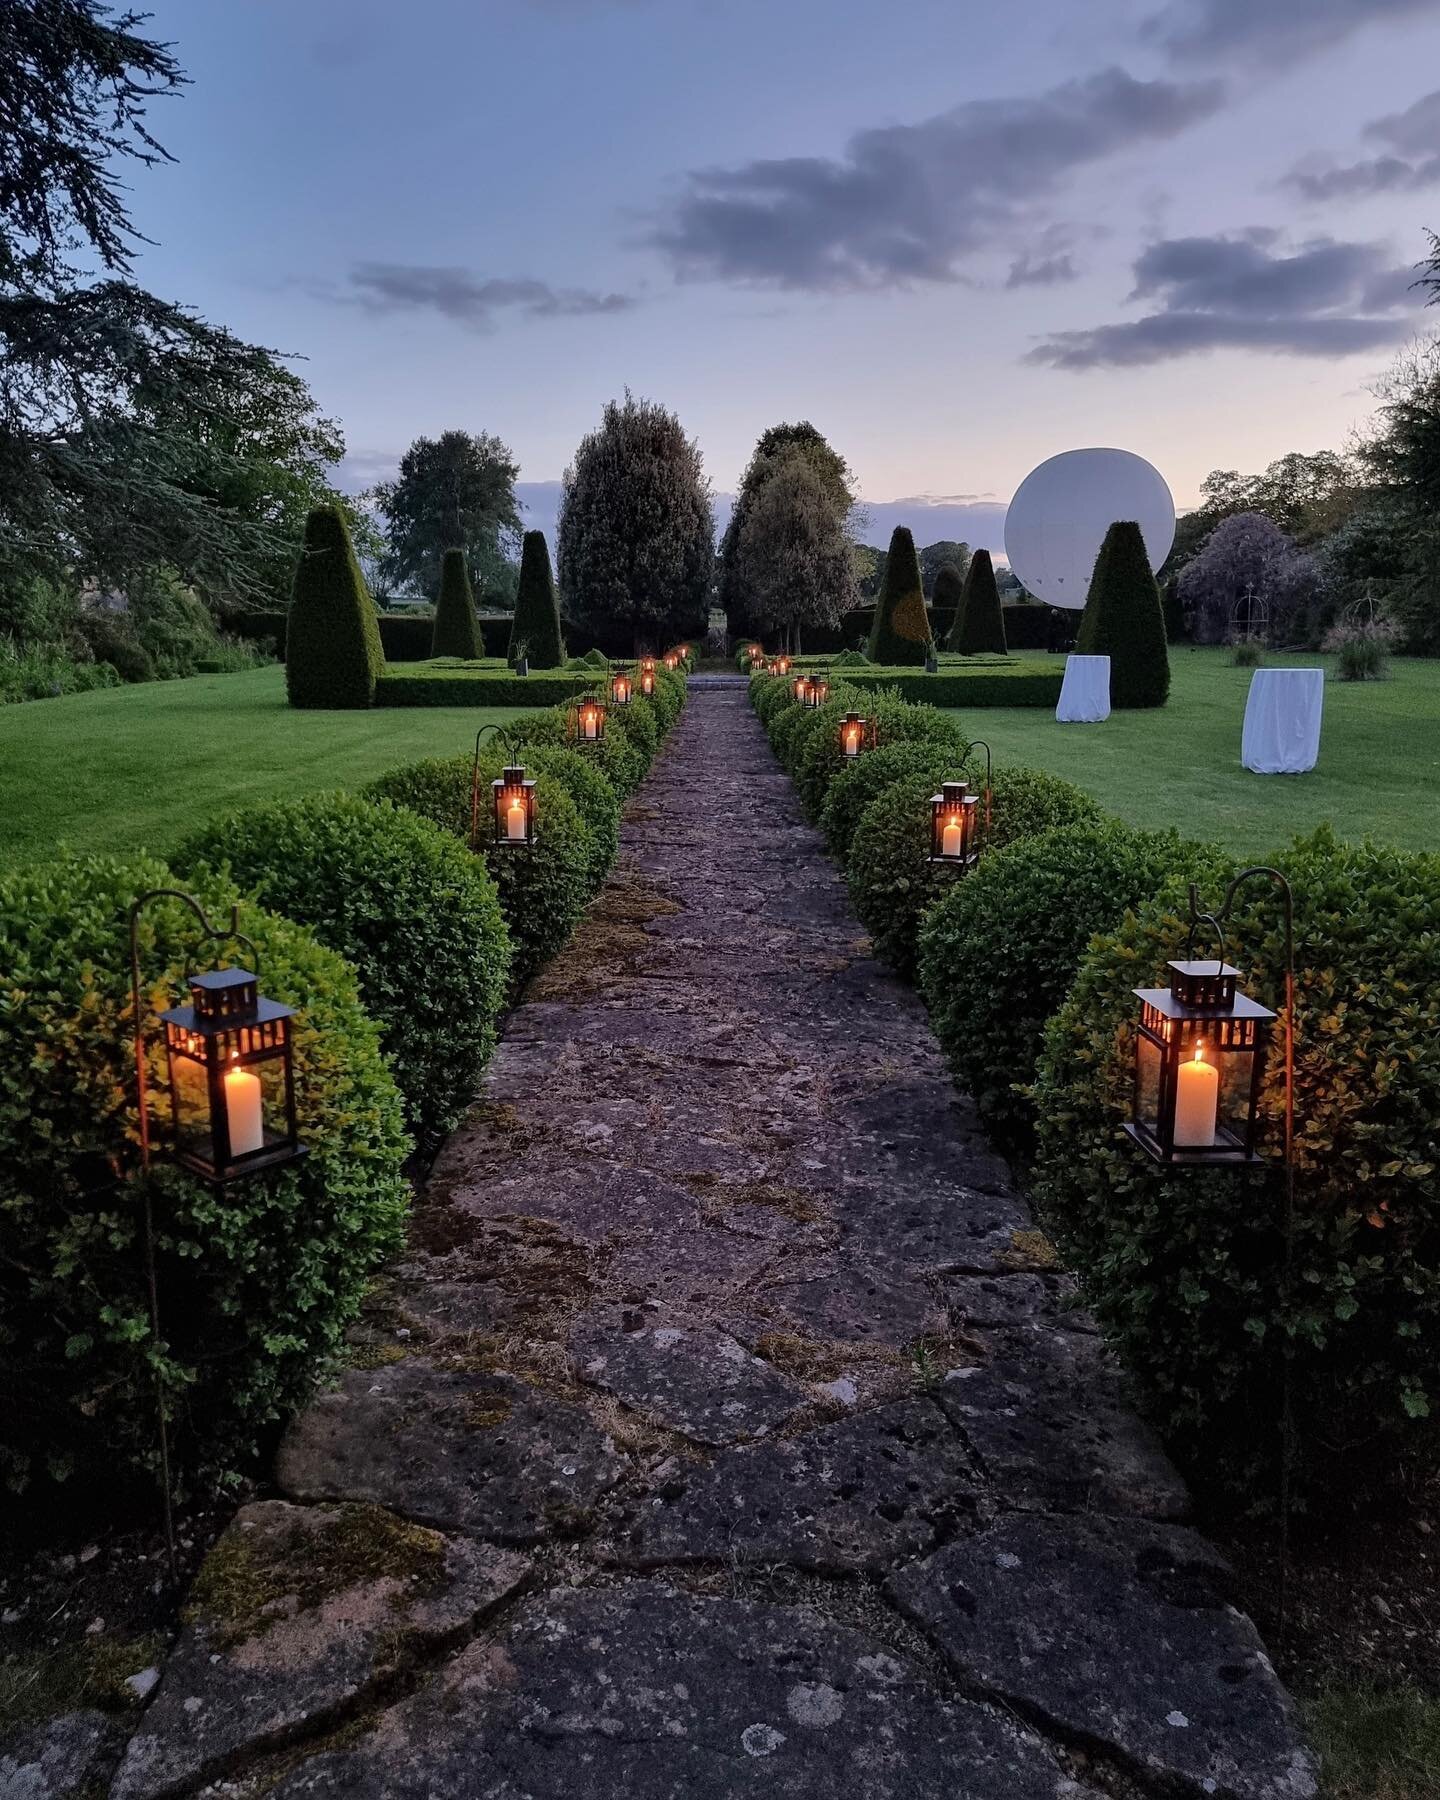 Stunning venue. Our candle lanterns and Shepard&rsquo;s hooks looking amazing in the setting sun. All those trees lit up a treat later in the evening with our big IP led floods! 🌲 

-
-
-

#sunset #lantern #production #events #somerset #wedding #fro